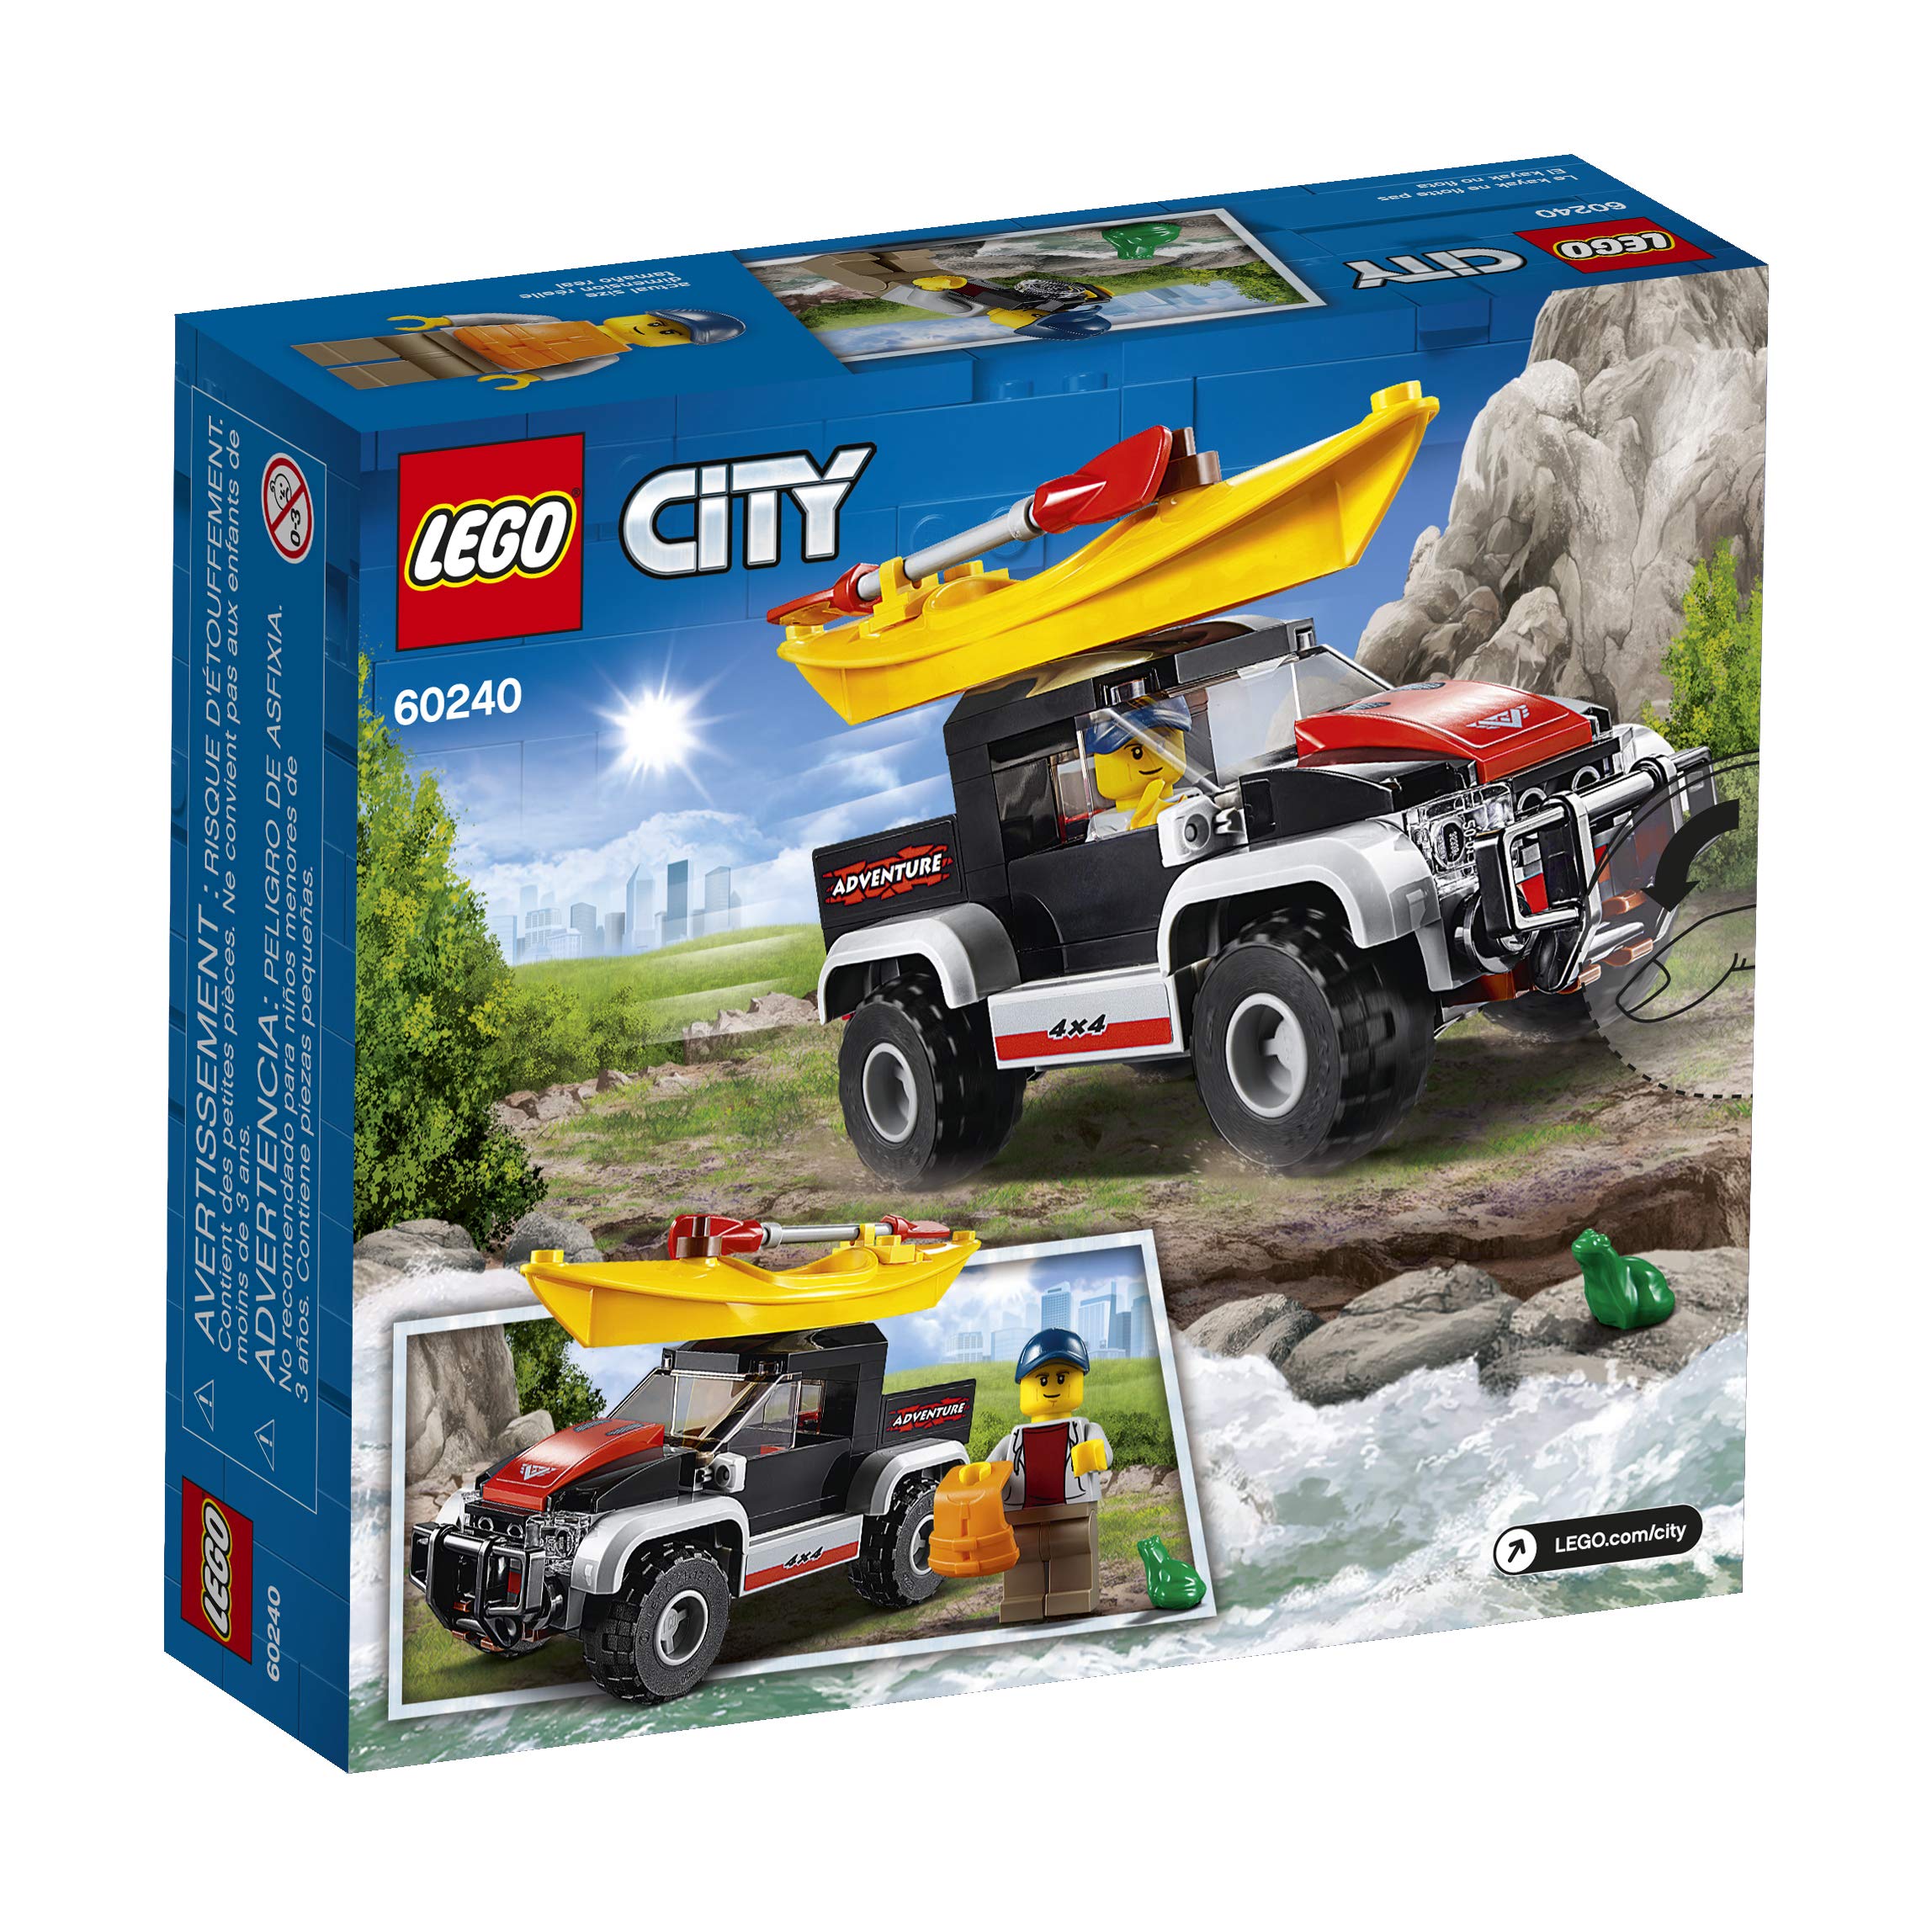 LEGO City Great Vehicles Kayak Adventure 60240 Building Kit (84 Pieces) (Discontinued by Manufacturer)